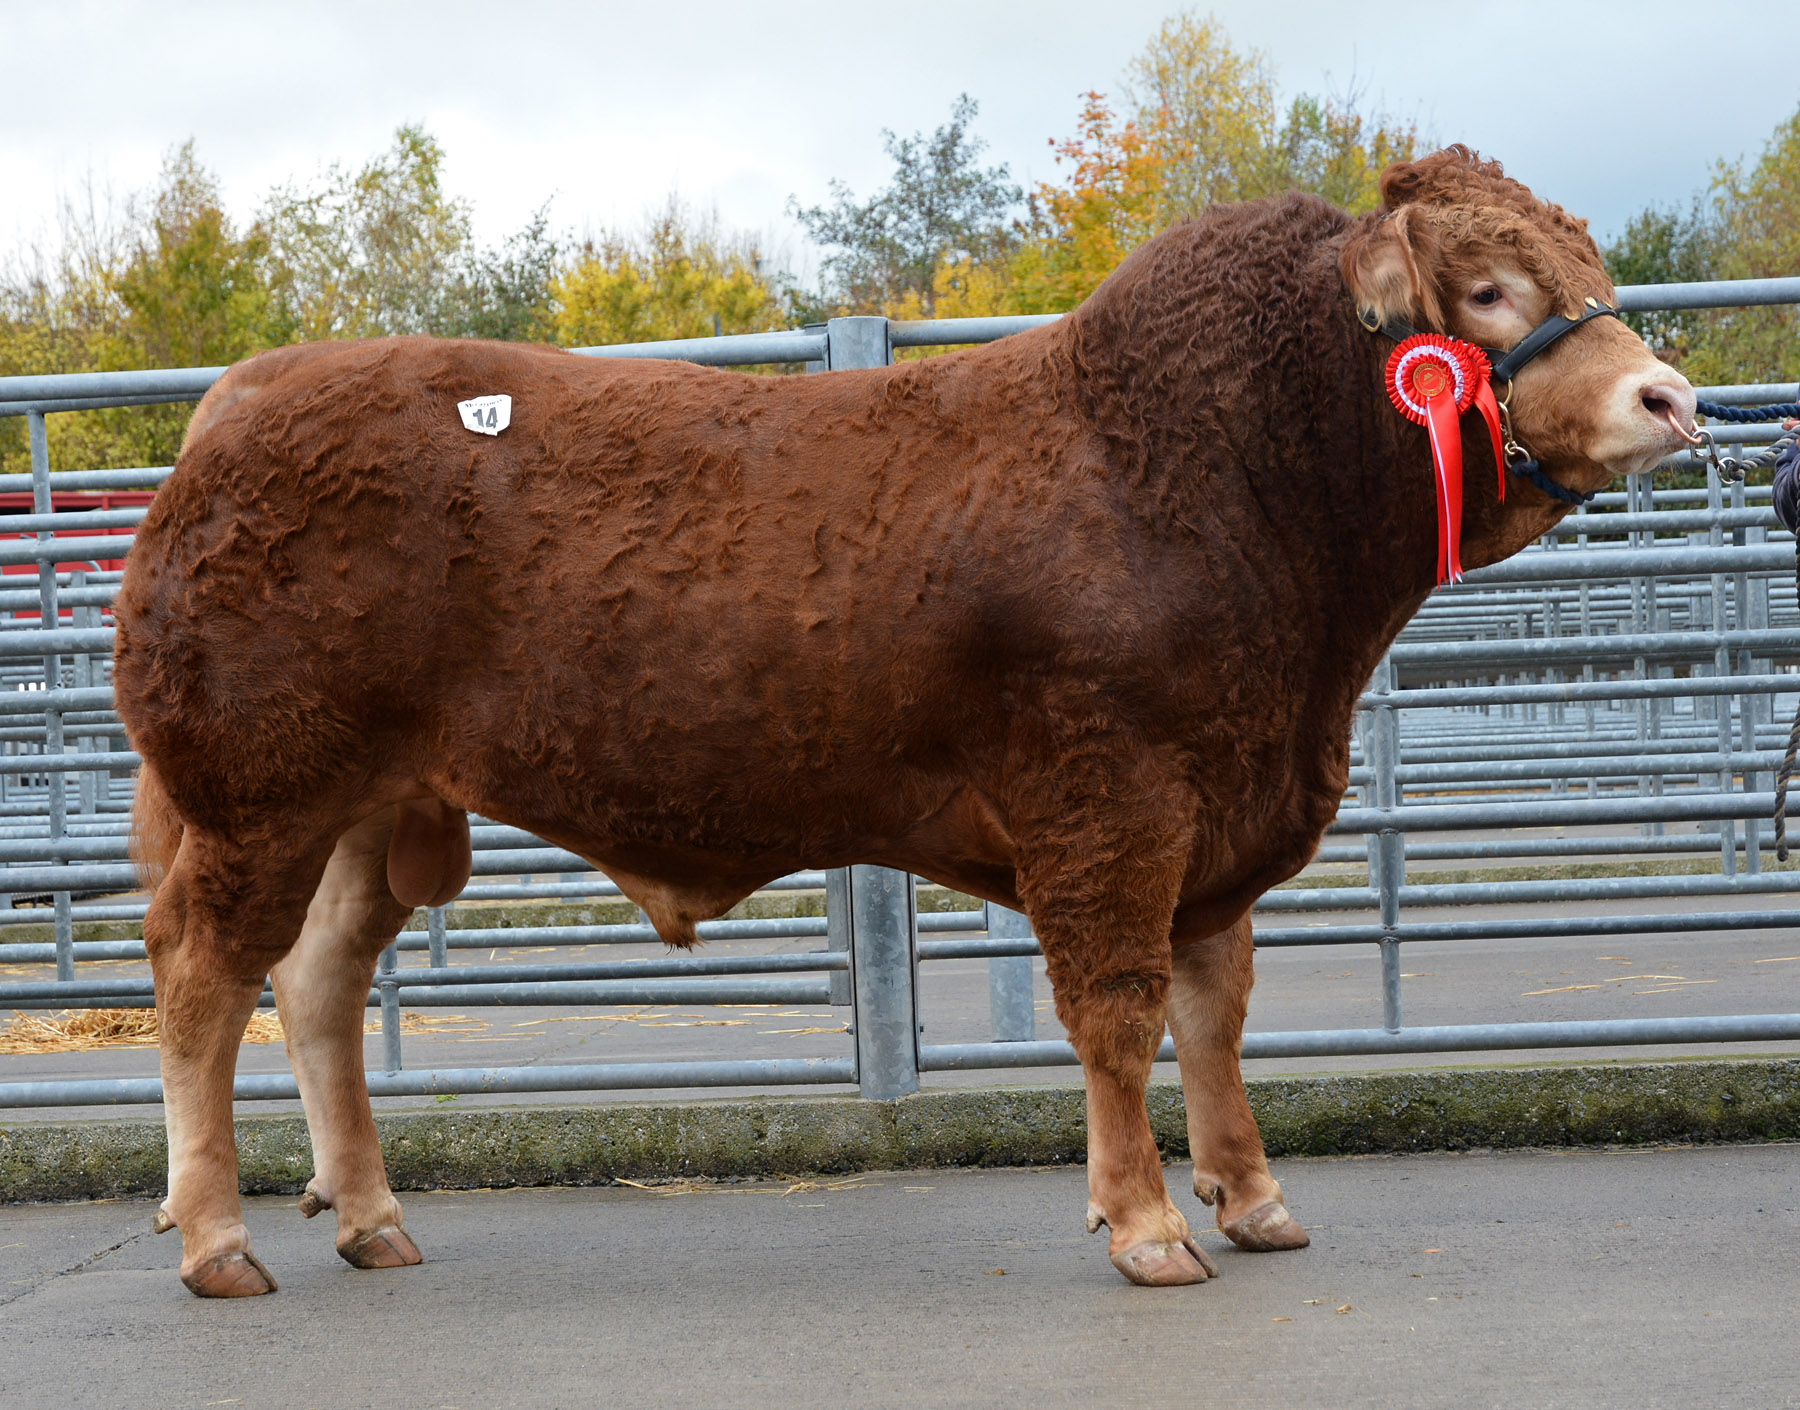 Lot 14 Nealford Loxley 5,500gns